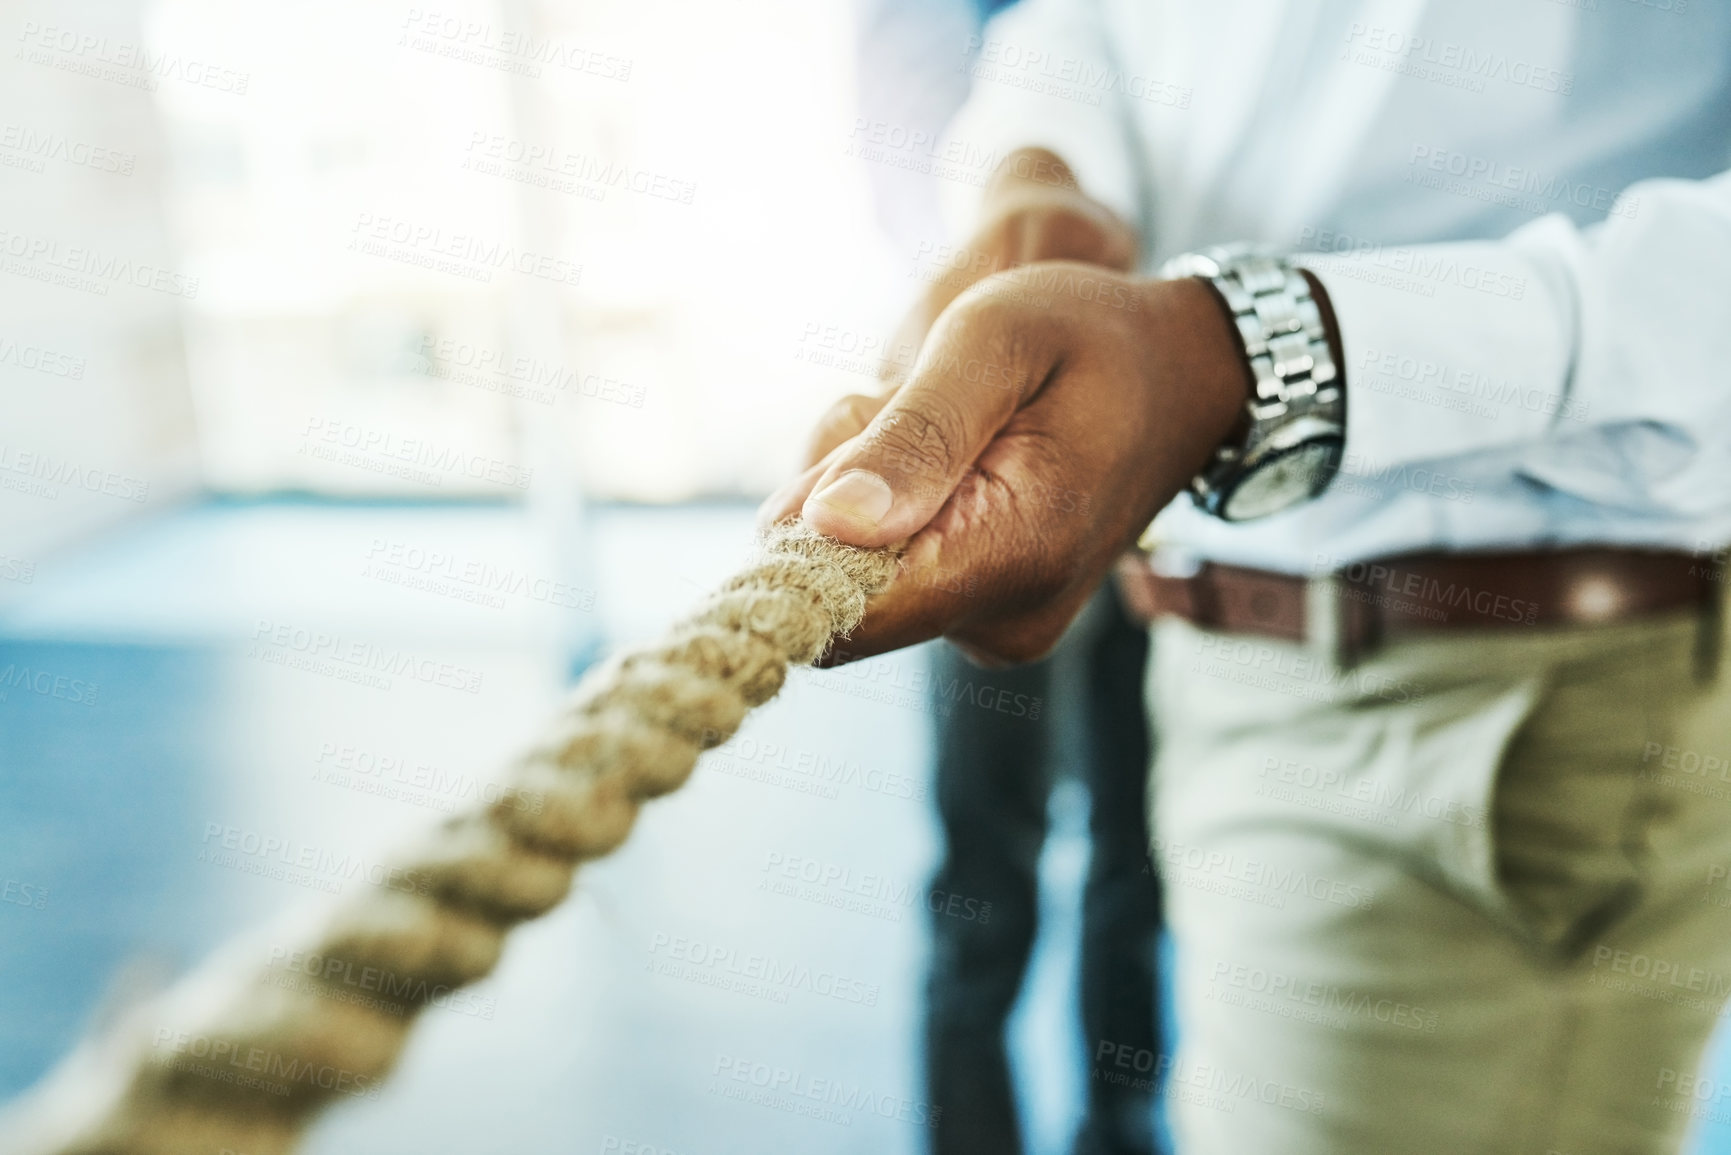 Buy stock photo Shot of an unrecognisable businessman pulling on a rope during tug of war